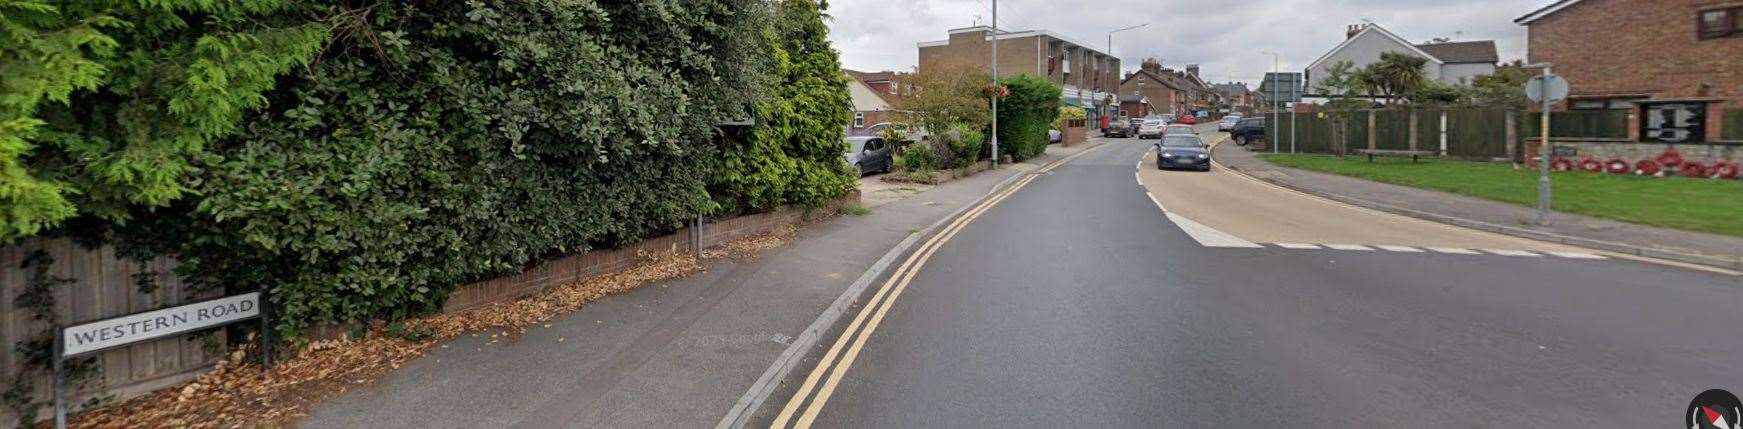 The incident happened along Western Road in Sevenoaks. Photo credit: Google Maps